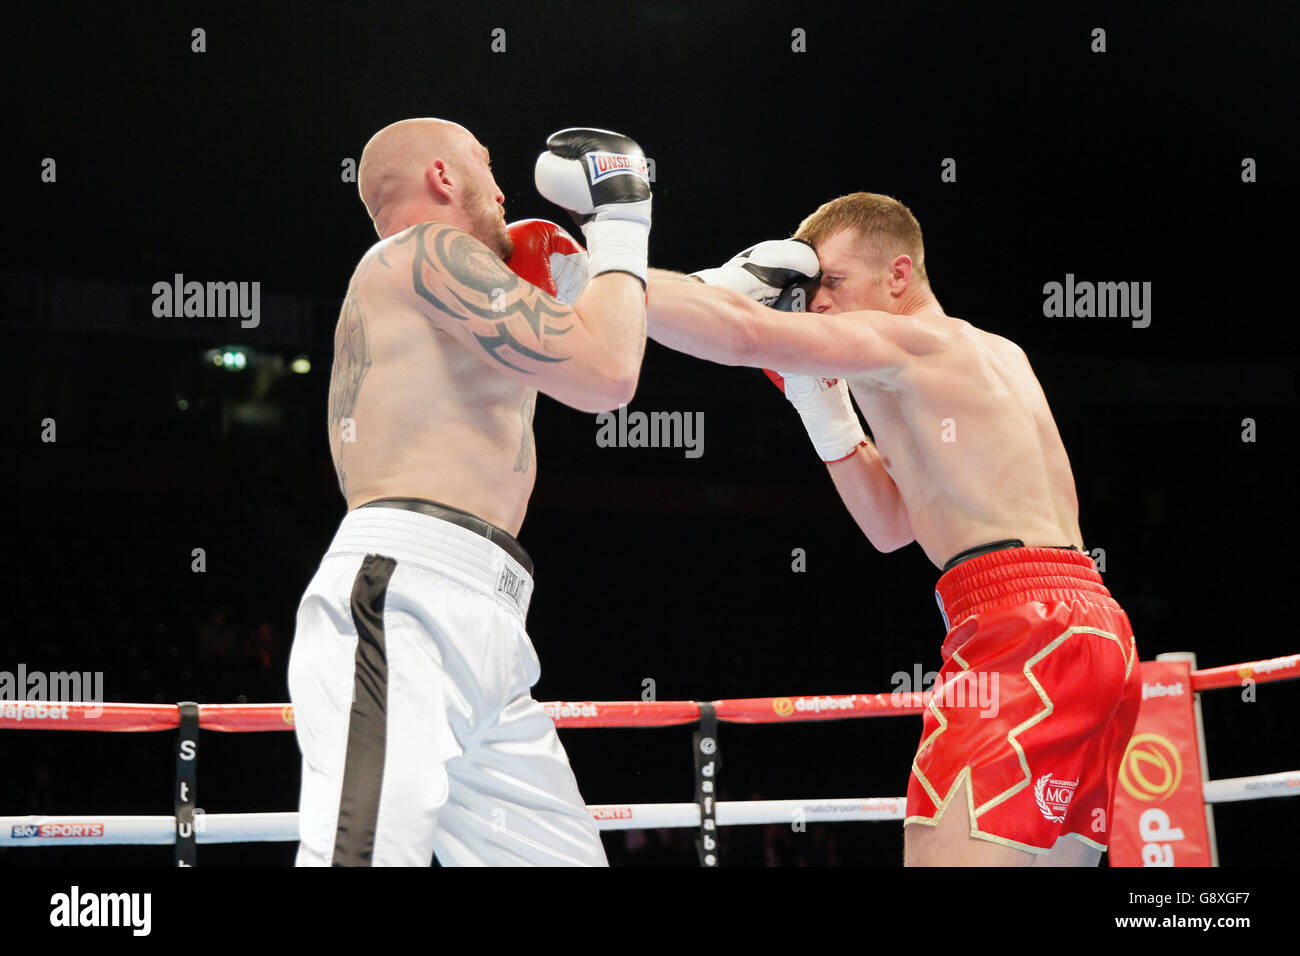 Warren Baister (right) and Stanislav Eschner during the Cruiserweight contest at the Manchester Arena. Stock Photo